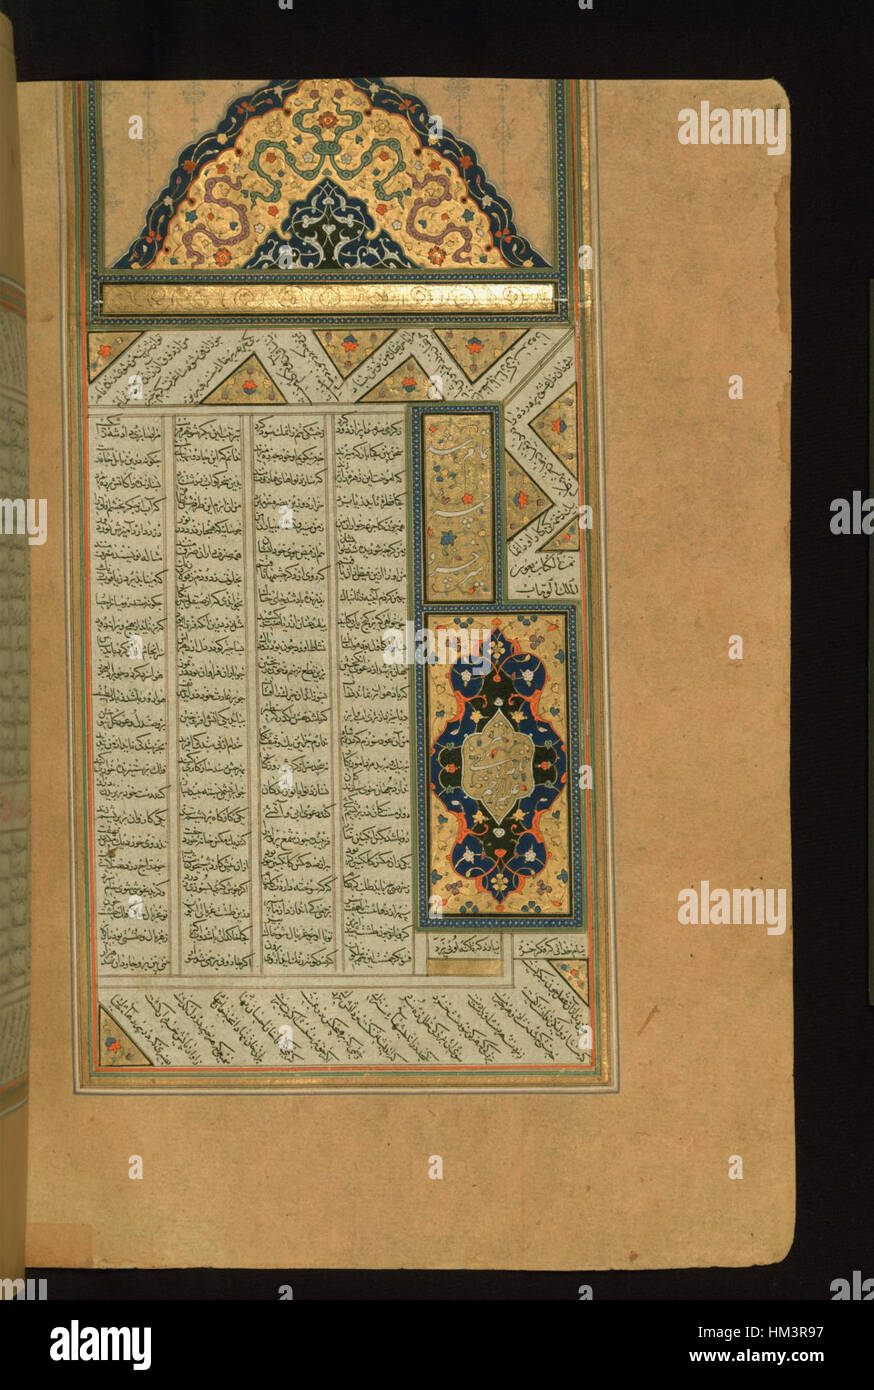 Hatifi - Incipit with Illuminated Pieces - Walters W657282B - Full Page Stock Photo